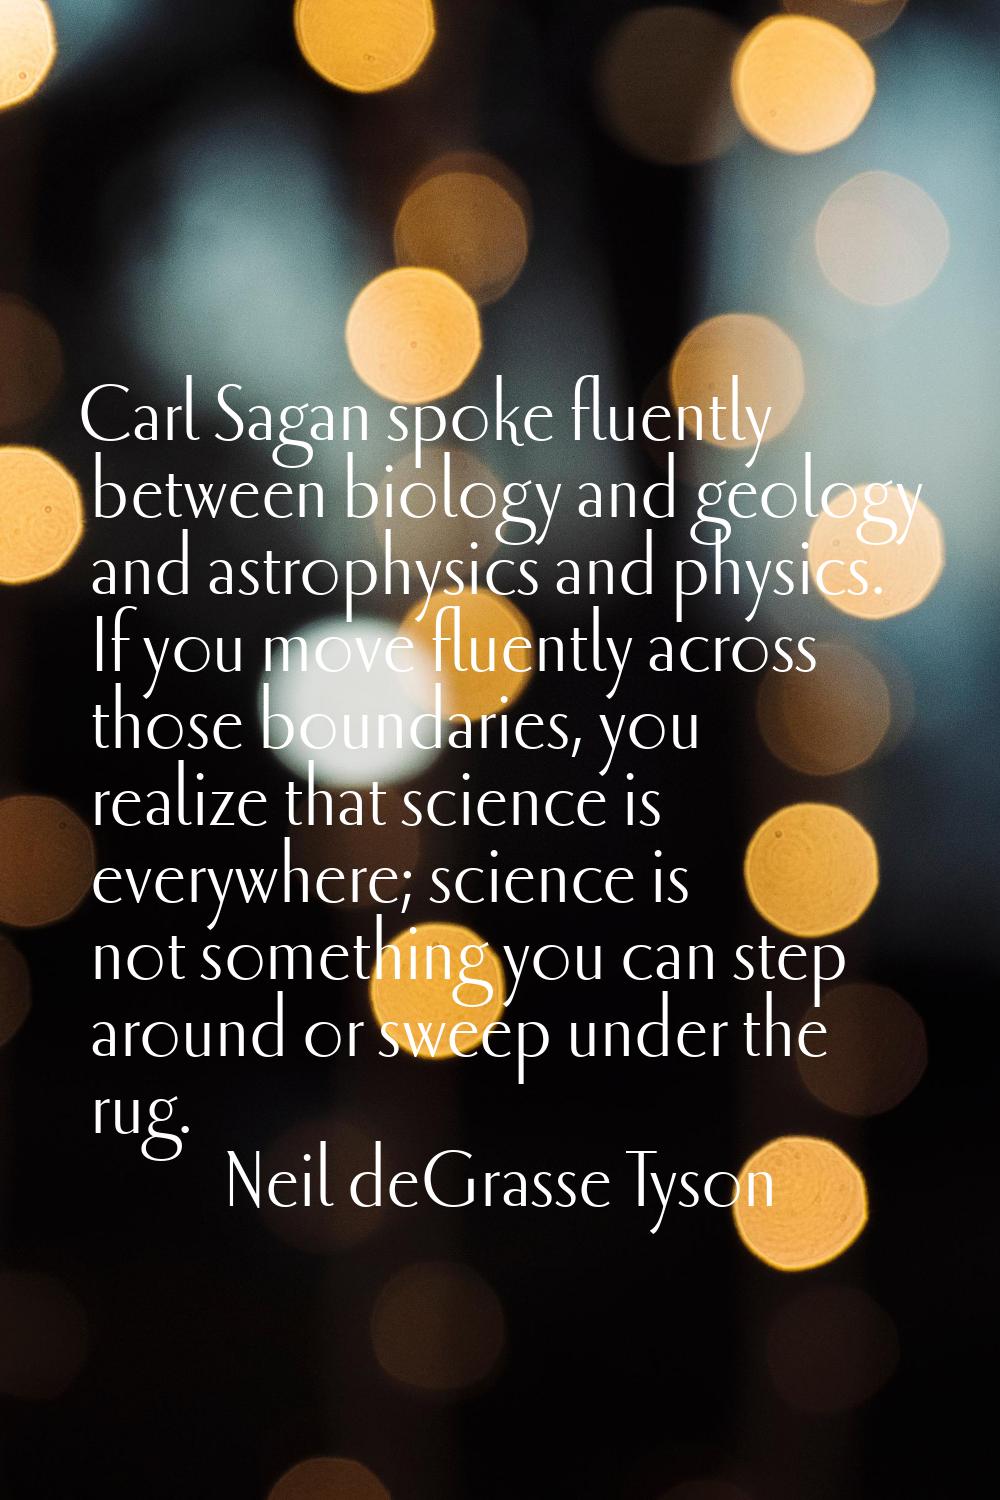 Carl Sagan spoke fluently between biology and geology and astrophysics and physics. If you move flu